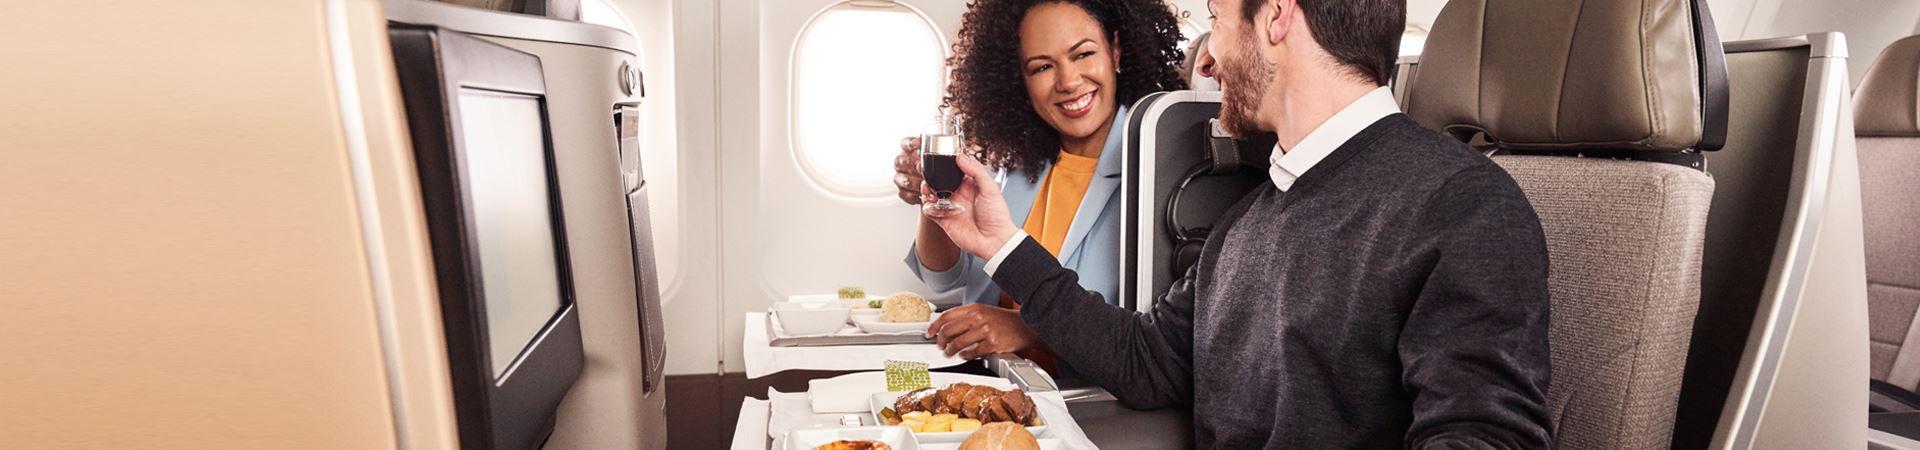 A smiling man and woman sitting side by side aboard a TAP plane. Both hold a glass in their hand and make a toast. In front of each, there is a tray with a meat meal, a bread and a "pastel de nata".